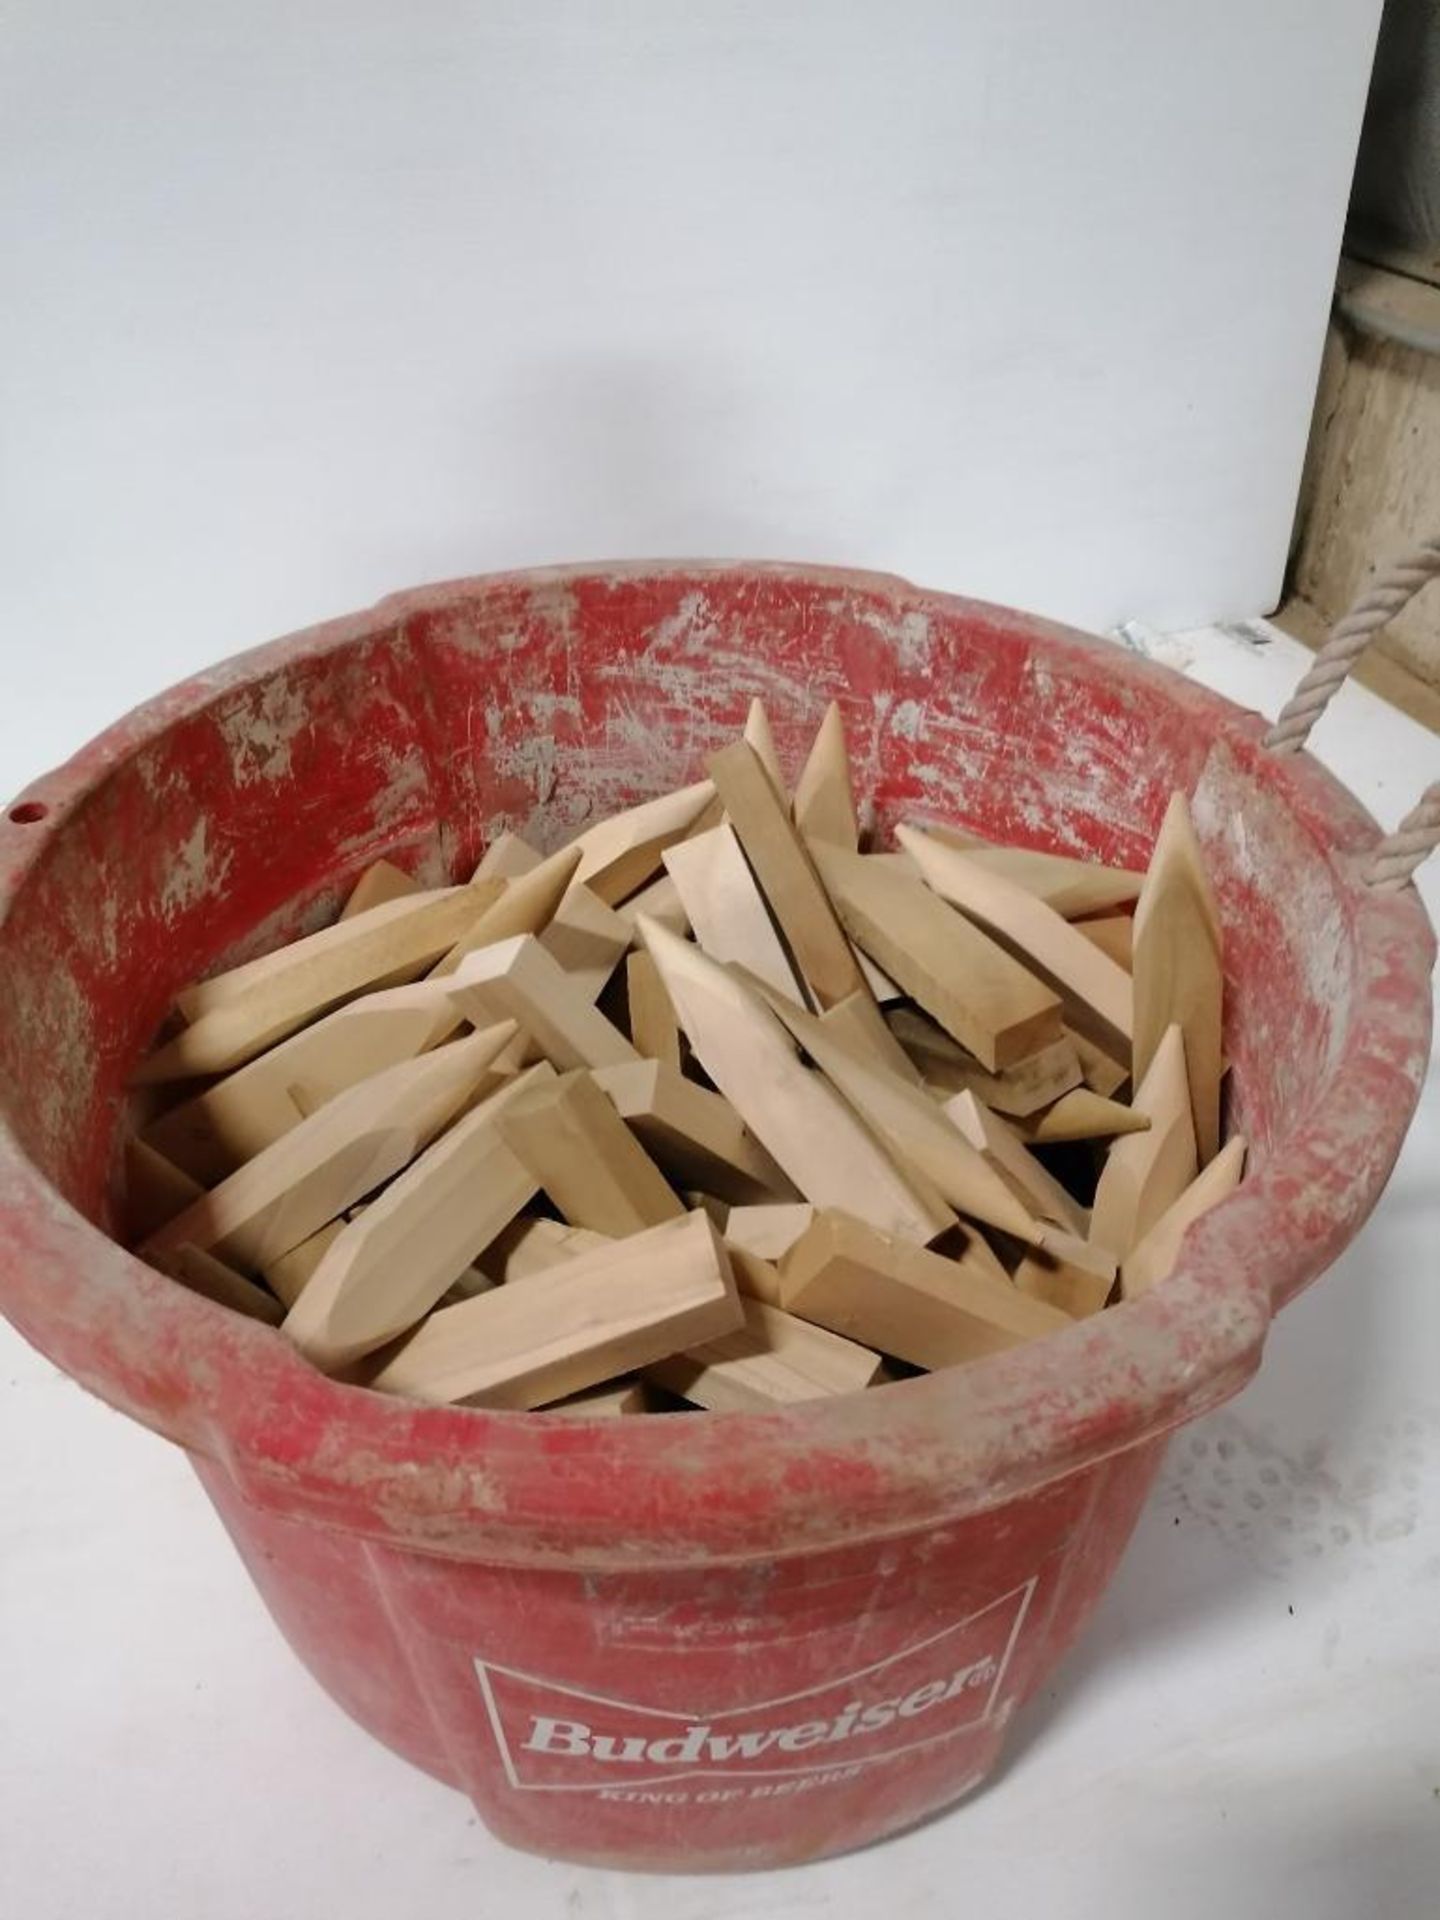 Bucket Wood Stakes. Located in Hazelwood, MO - Image 2 of 2